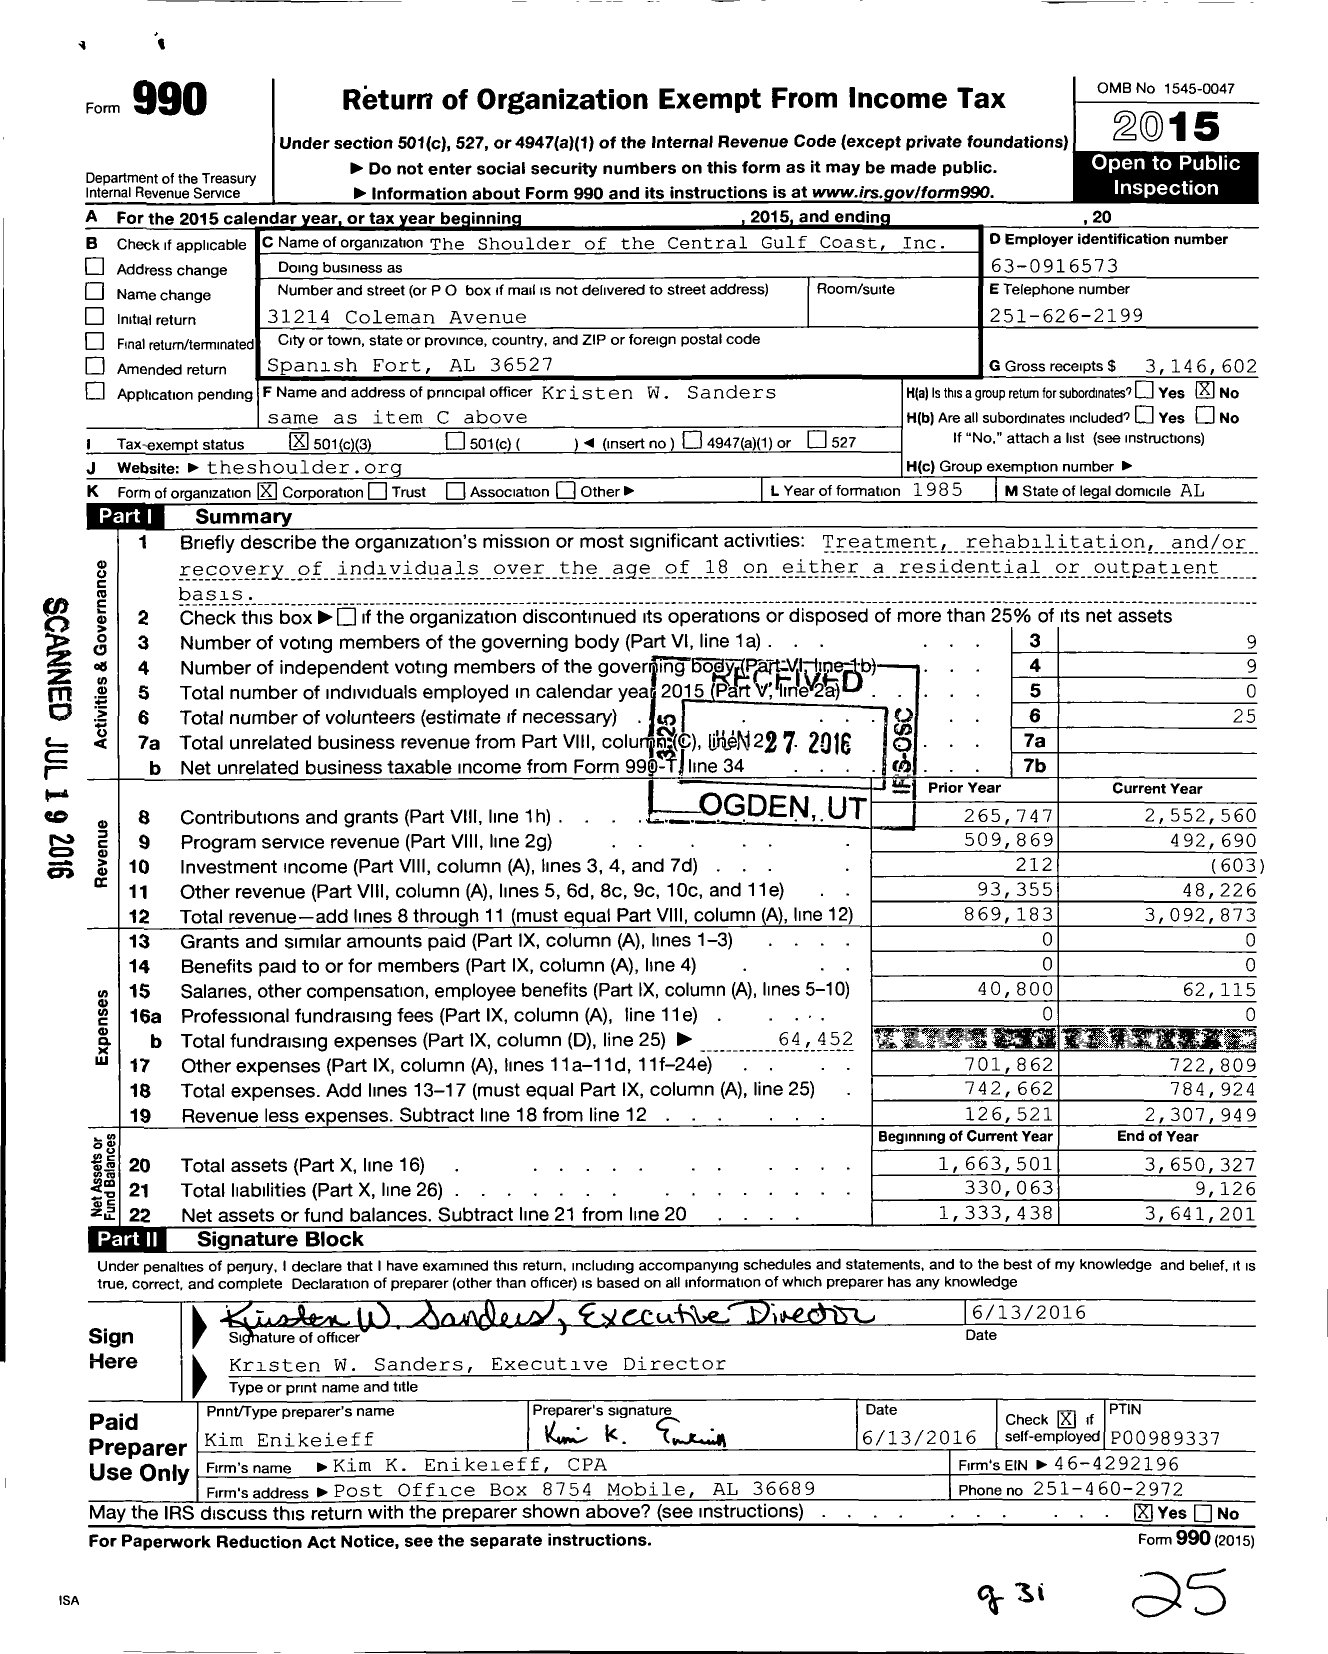 Image of first page of 2015 Form 990 for Shoulder Central Gulf Coast